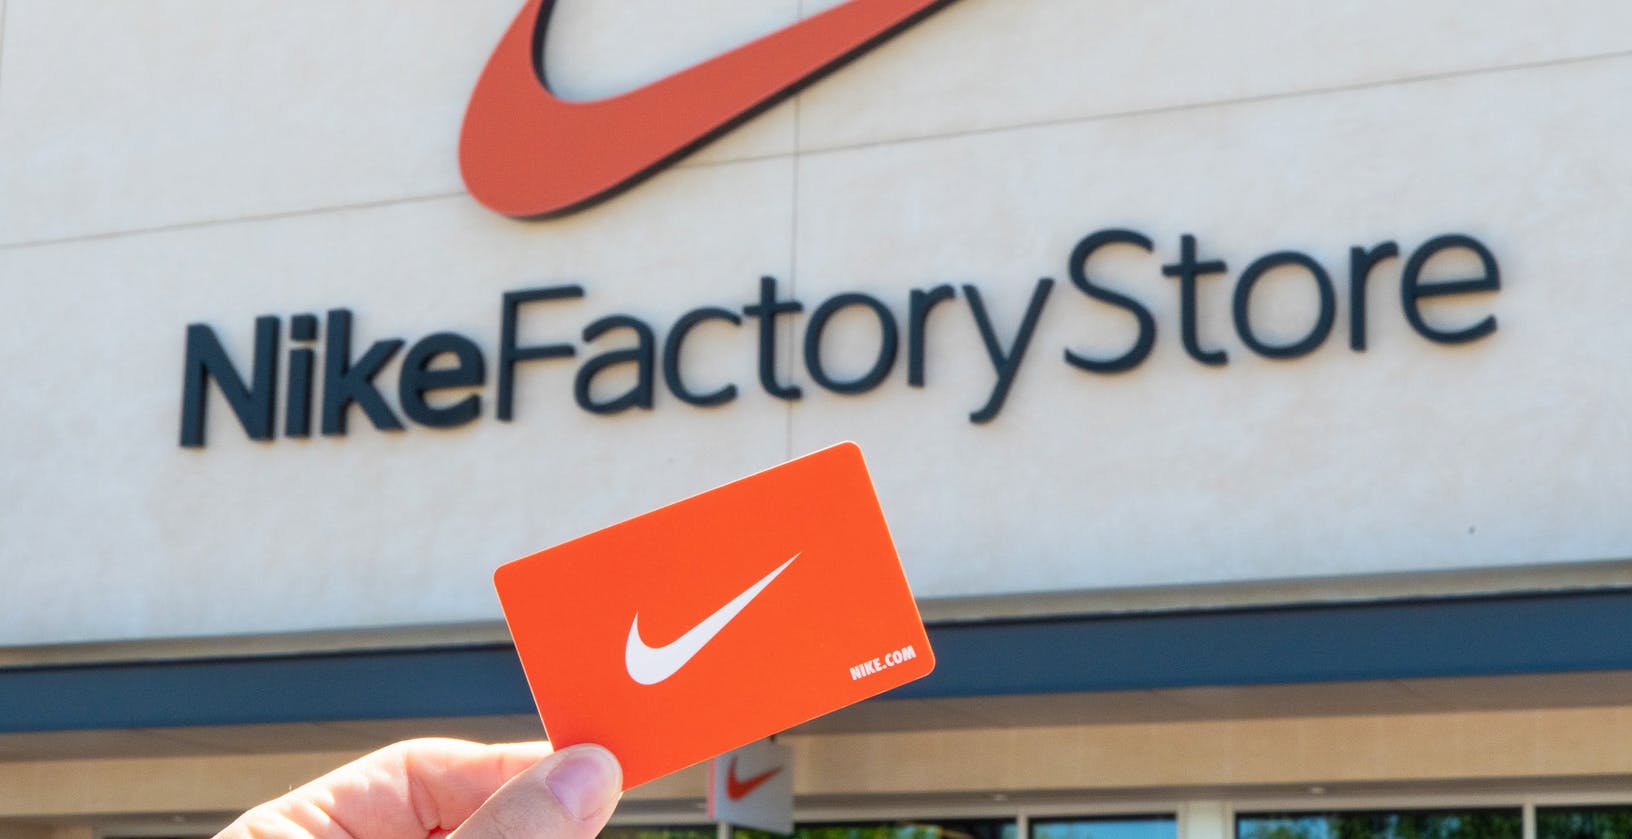 Nike Outlet Tips to Help You Save on Kicks - The Krazy Lady